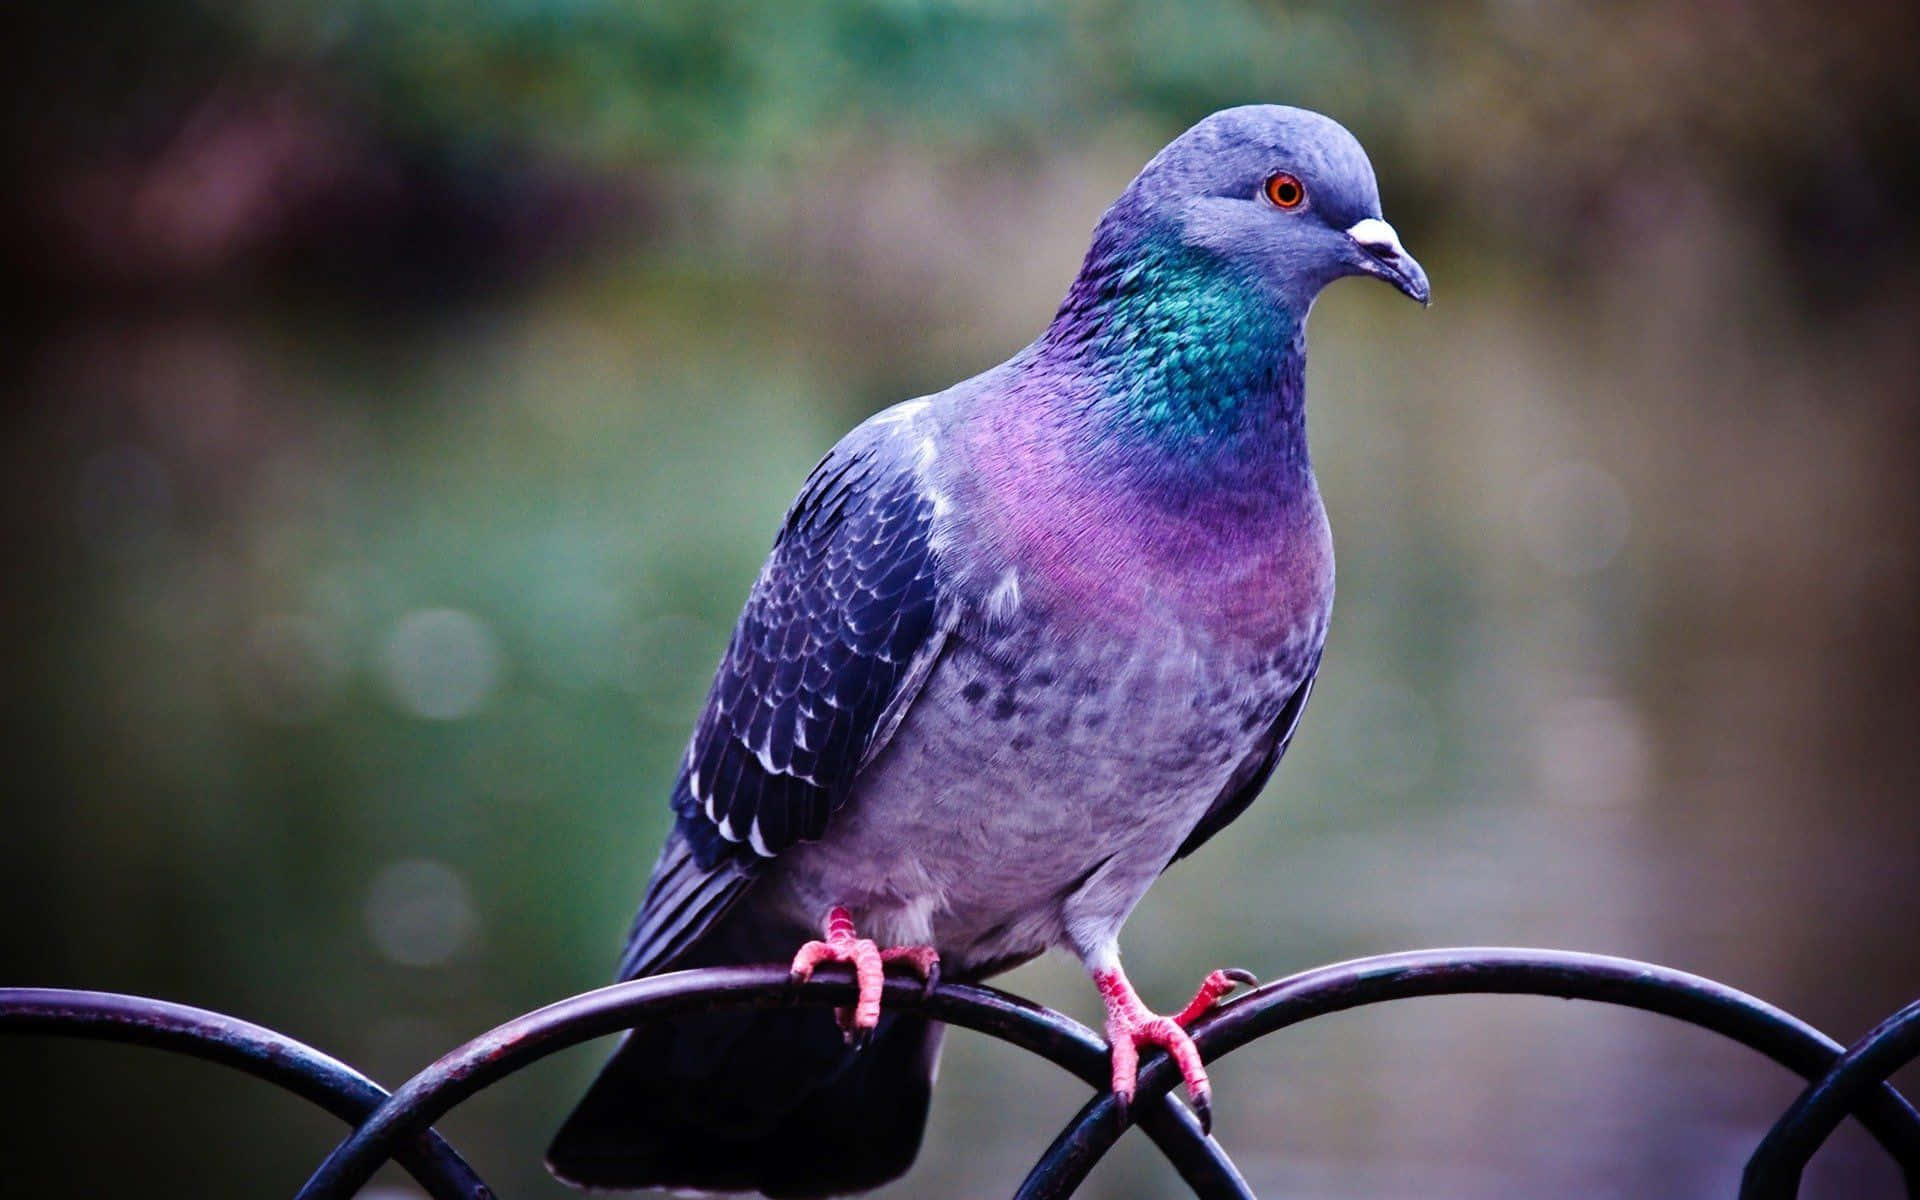 A proud pigeon from the heart of the city.